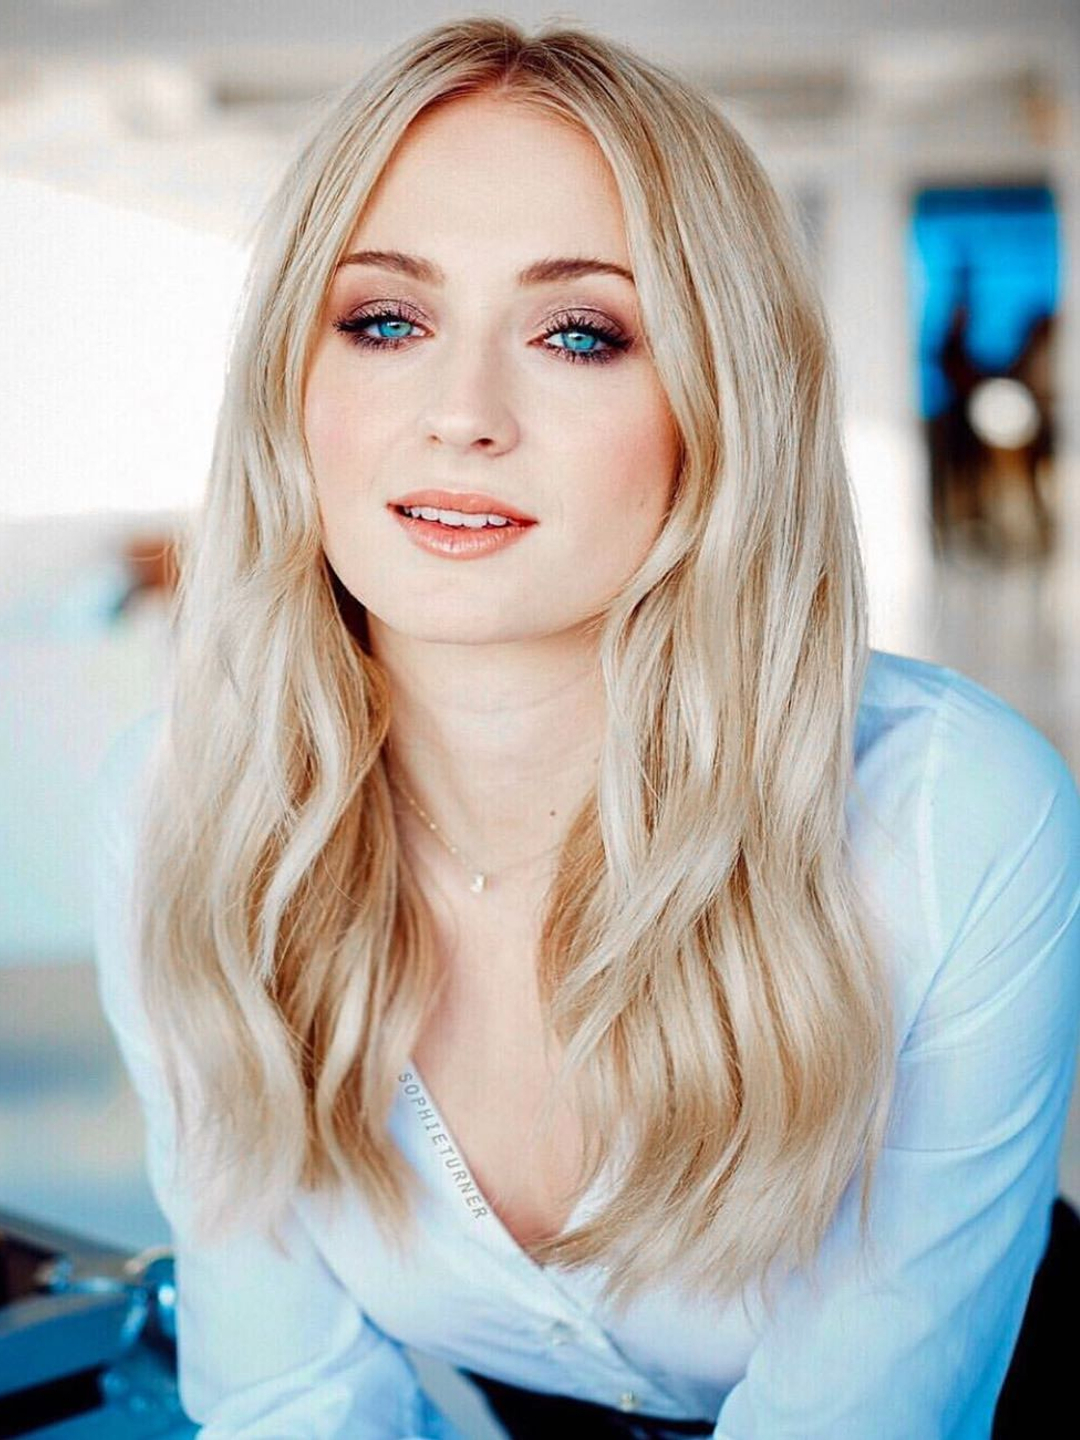 Sophie Turner where is she now